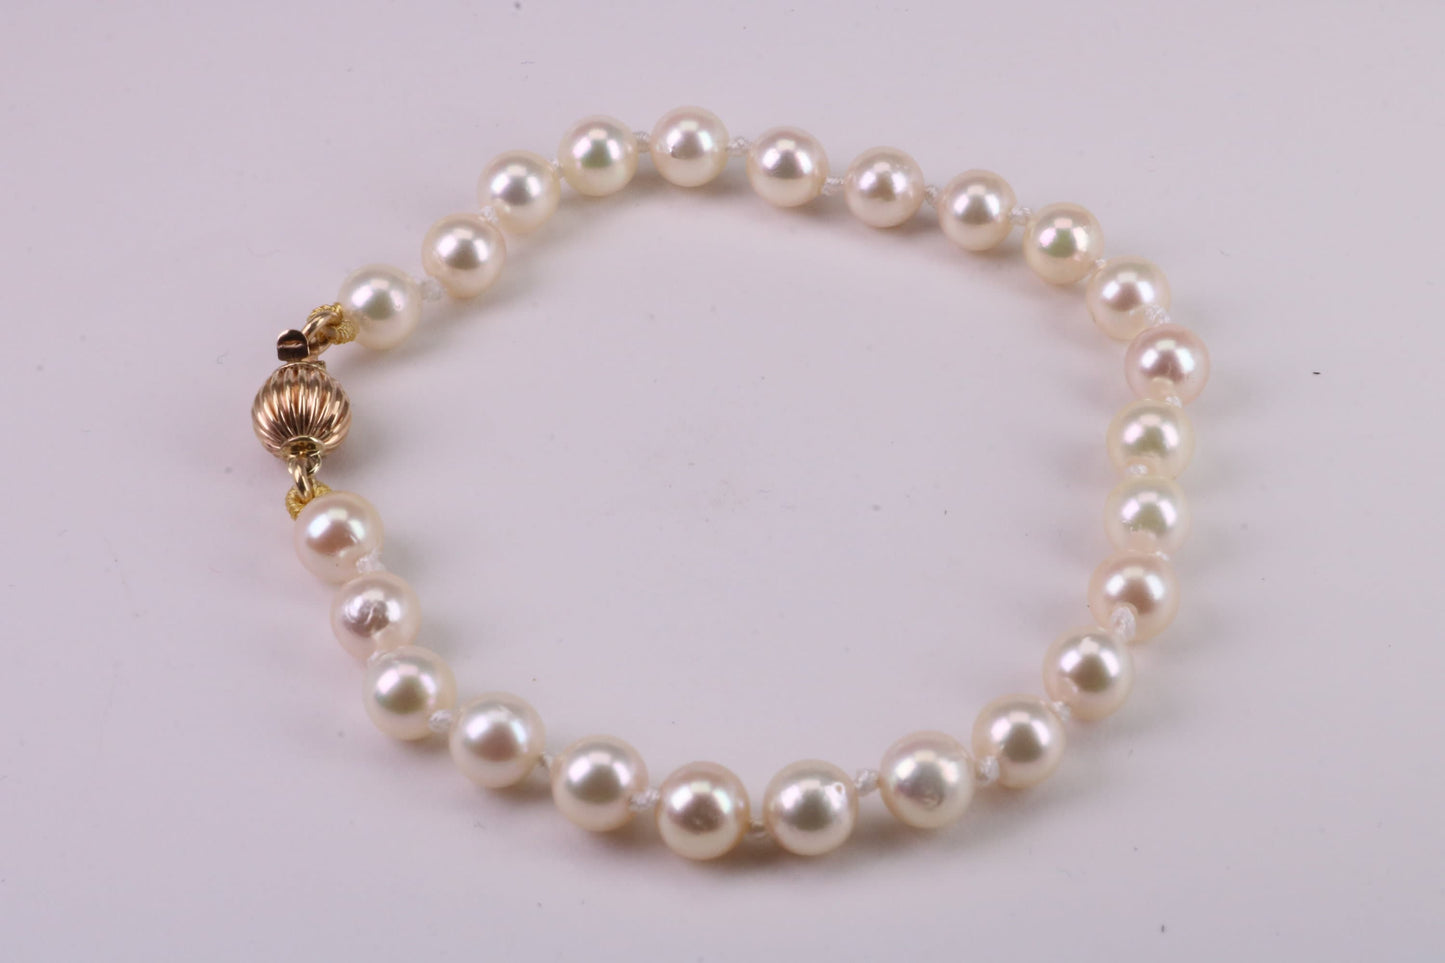 South Sea Simple 6 mm Round Natural Pearl Bracelet set with Solid Yellow Gold Lock